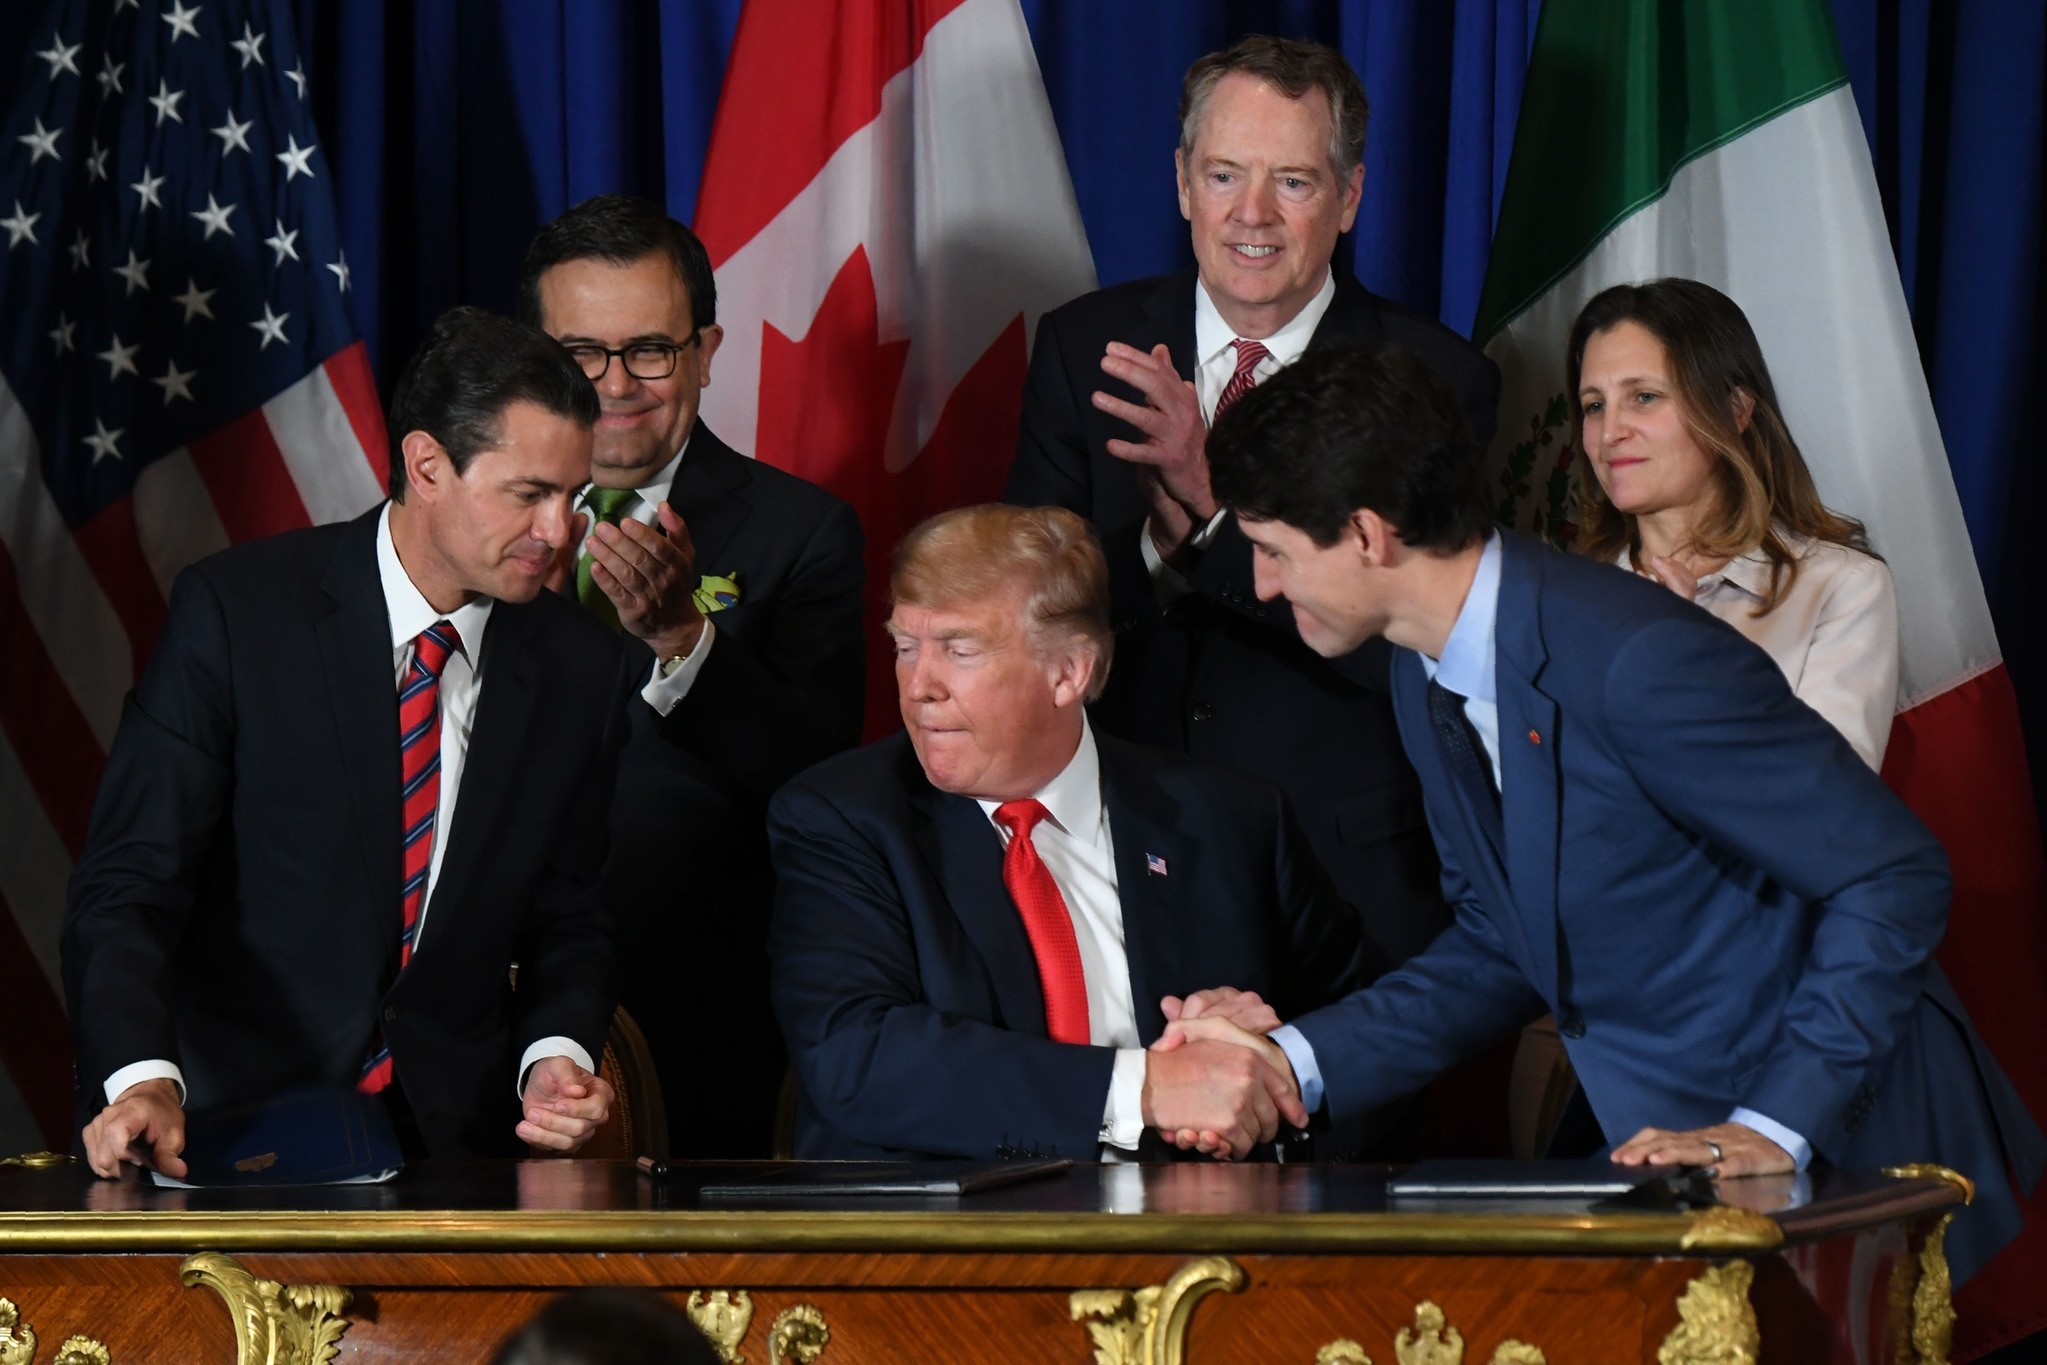 Left to right, Mexican President Enrique Pena Nieto, U.S. President Donald Trump and Canadian Prime Minister Justin Trudeau sign a new free trade agreement in Buenos Aires, on the sidelines of the G20 summit, Nov. 28.